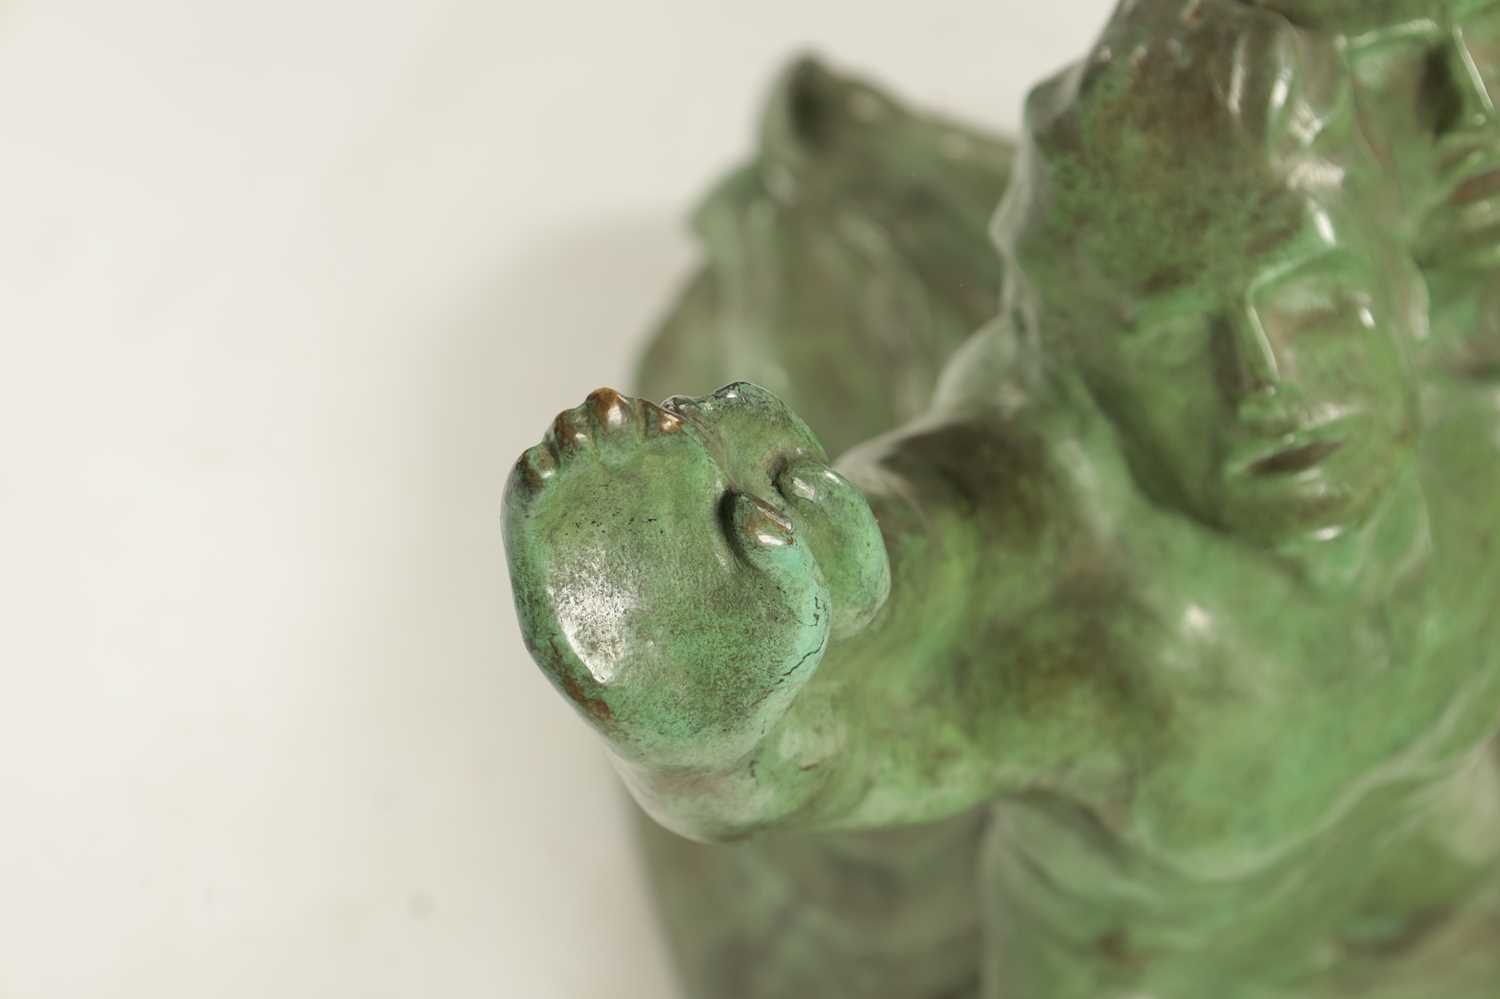 EUGENE CANNEEL (BELGIAN, BORN 1882). AN EARLY 20TH CENTURY PATINATED GREEN BRONZE SCULPTURE - Image 4 of 5